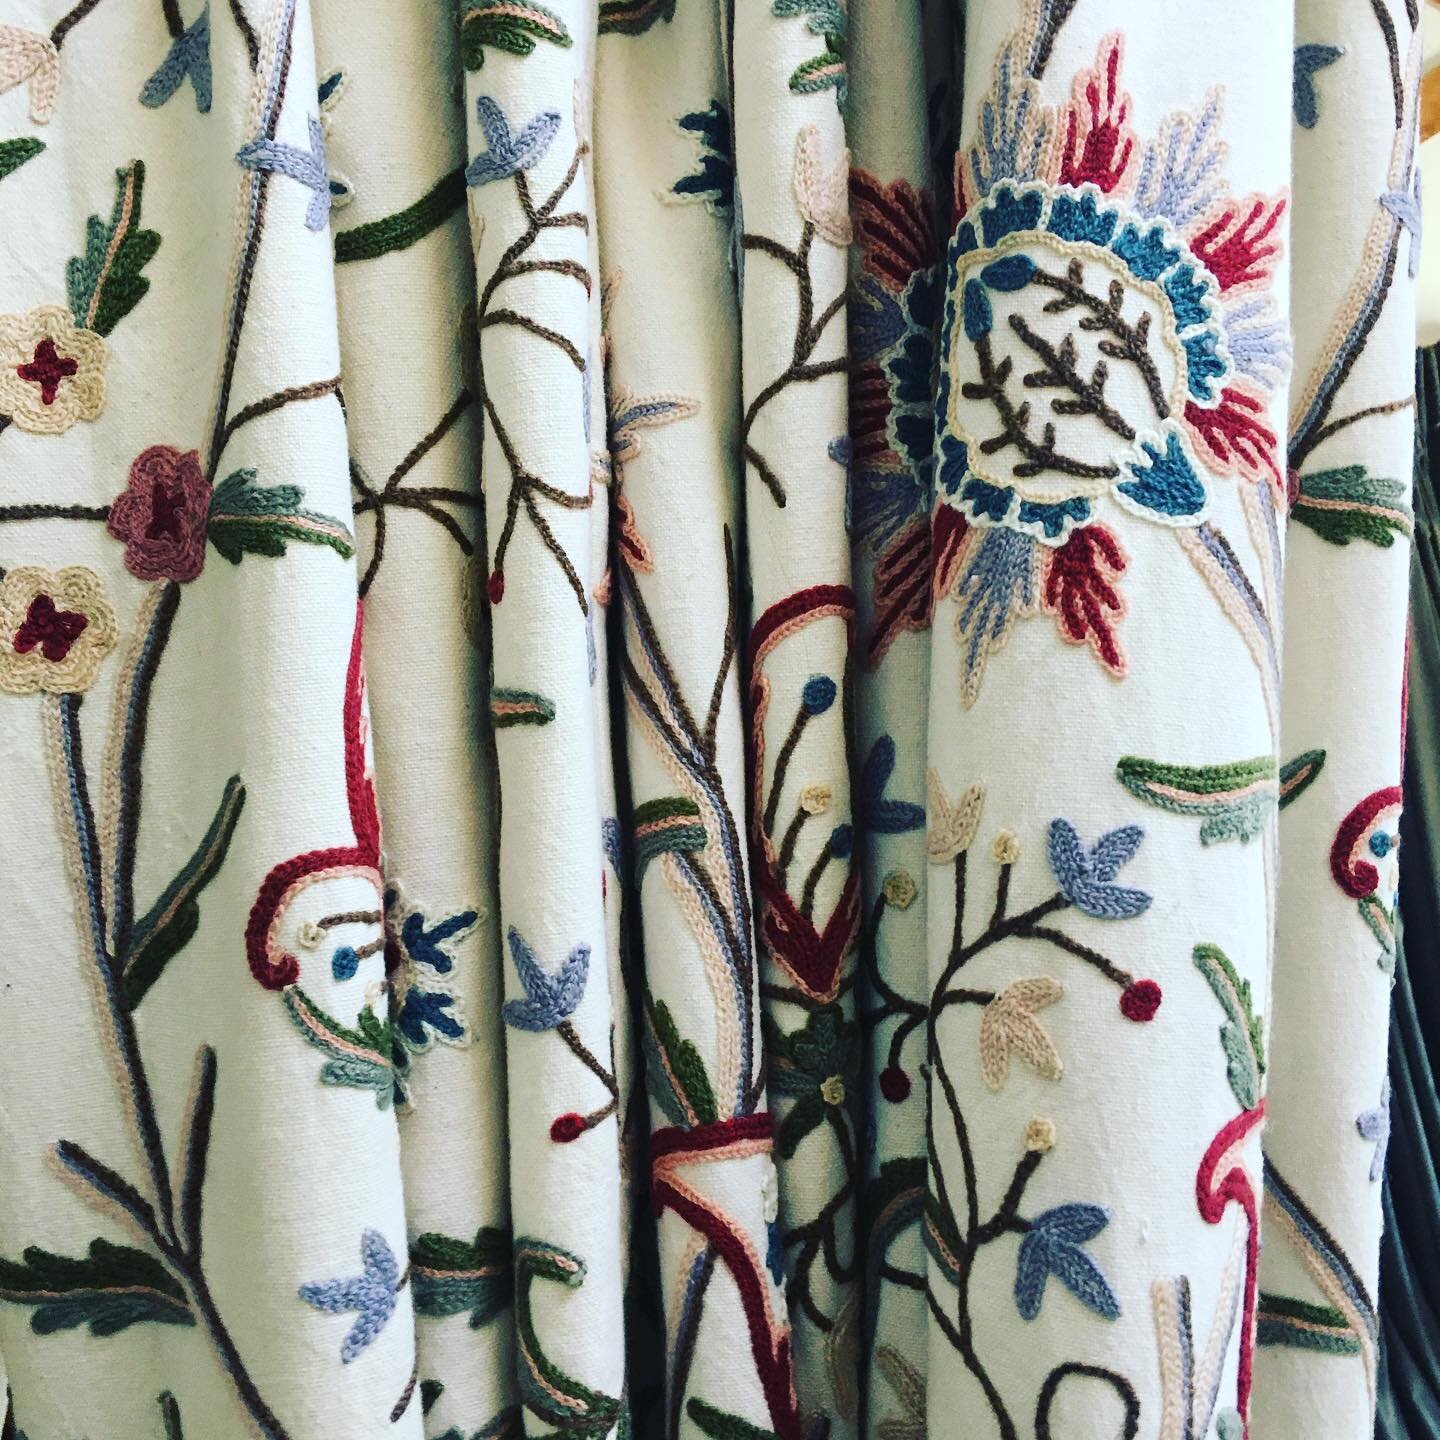 A touch of classic class. Crewelwork is for life not just for this season!!! 😄#crewelwork #classicstyle #classycurtains